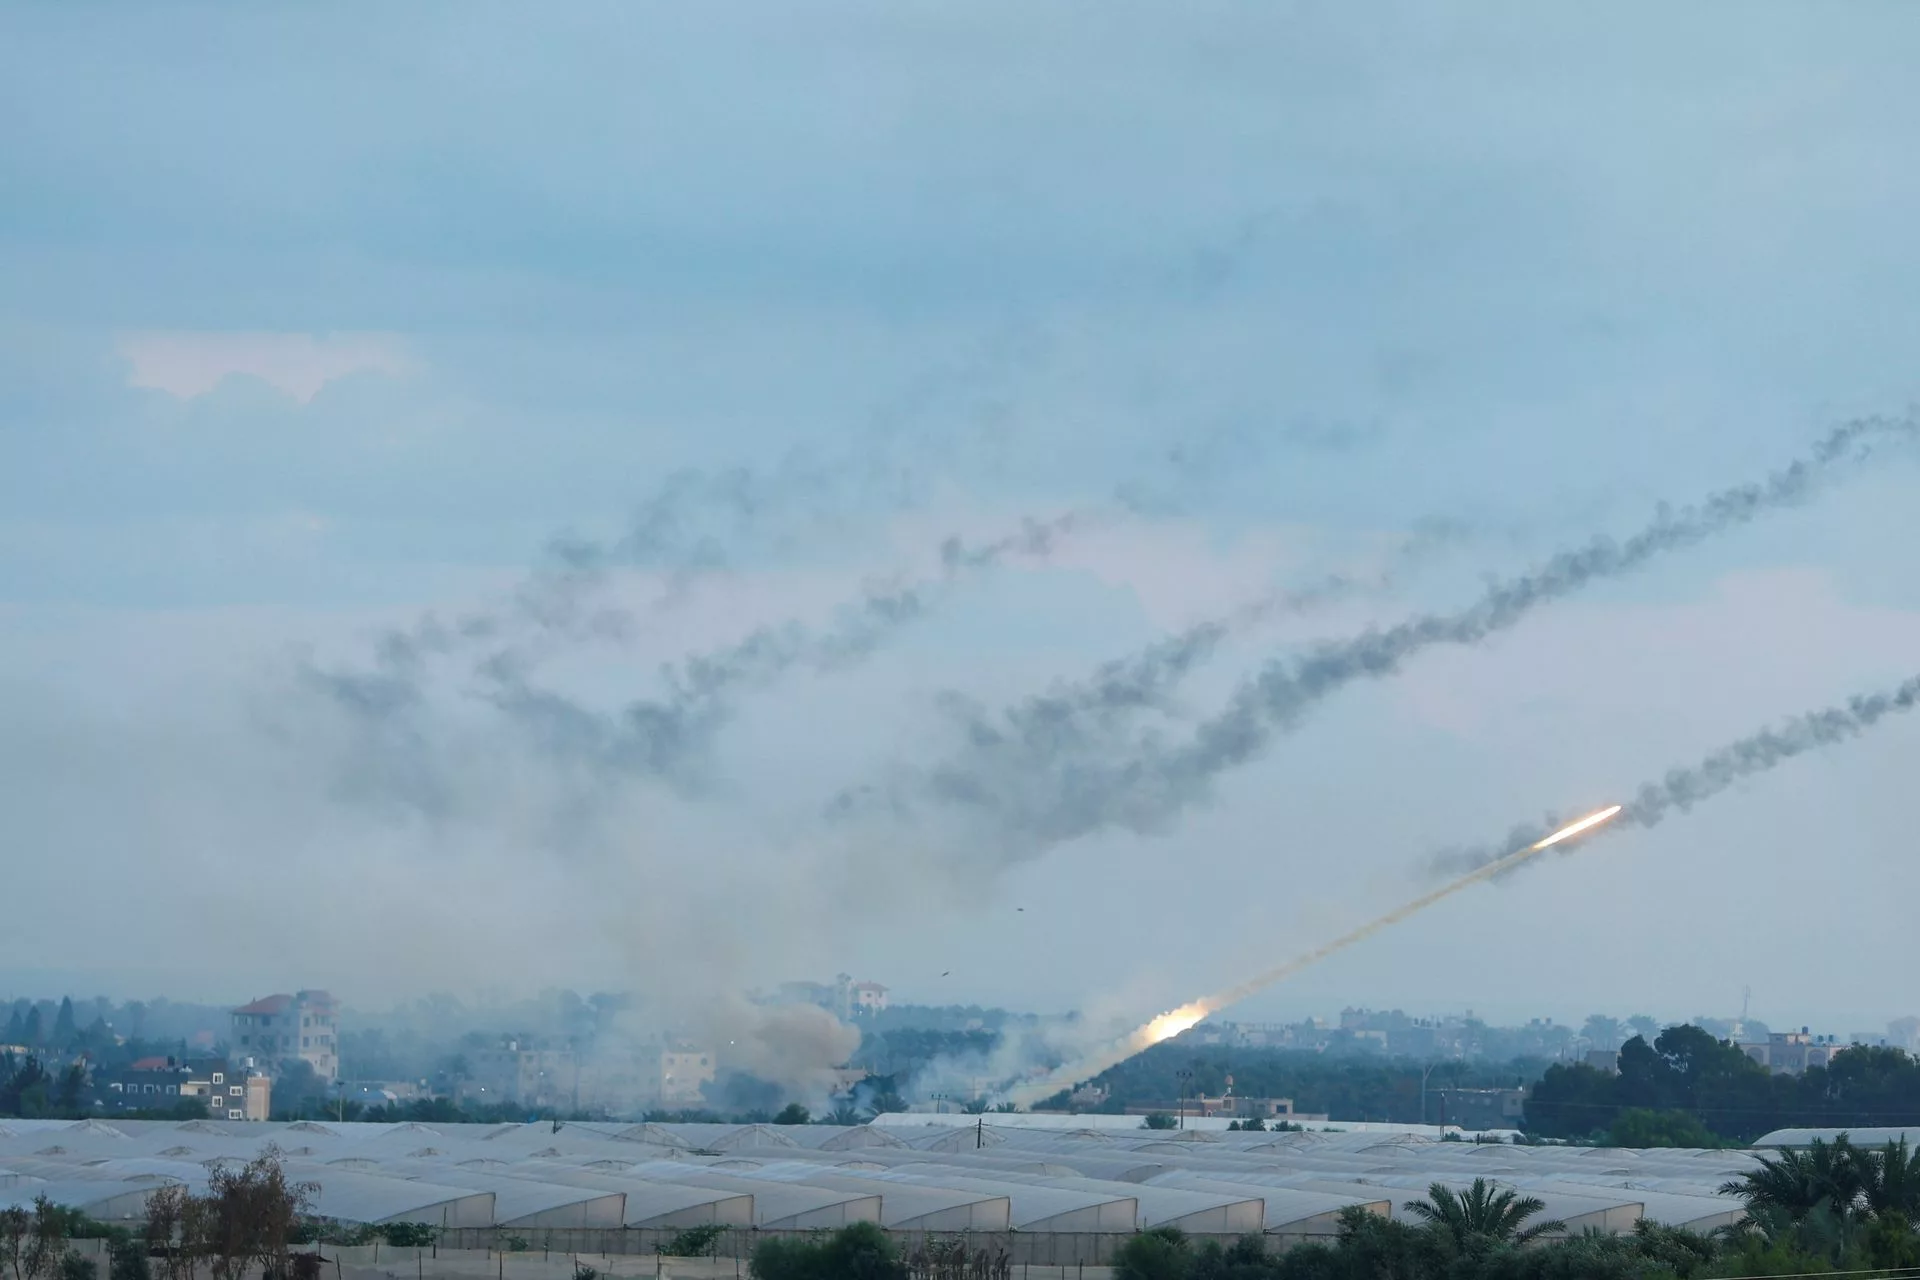 Palestinian gunmen reported in Israel as barrages launched from Gaza